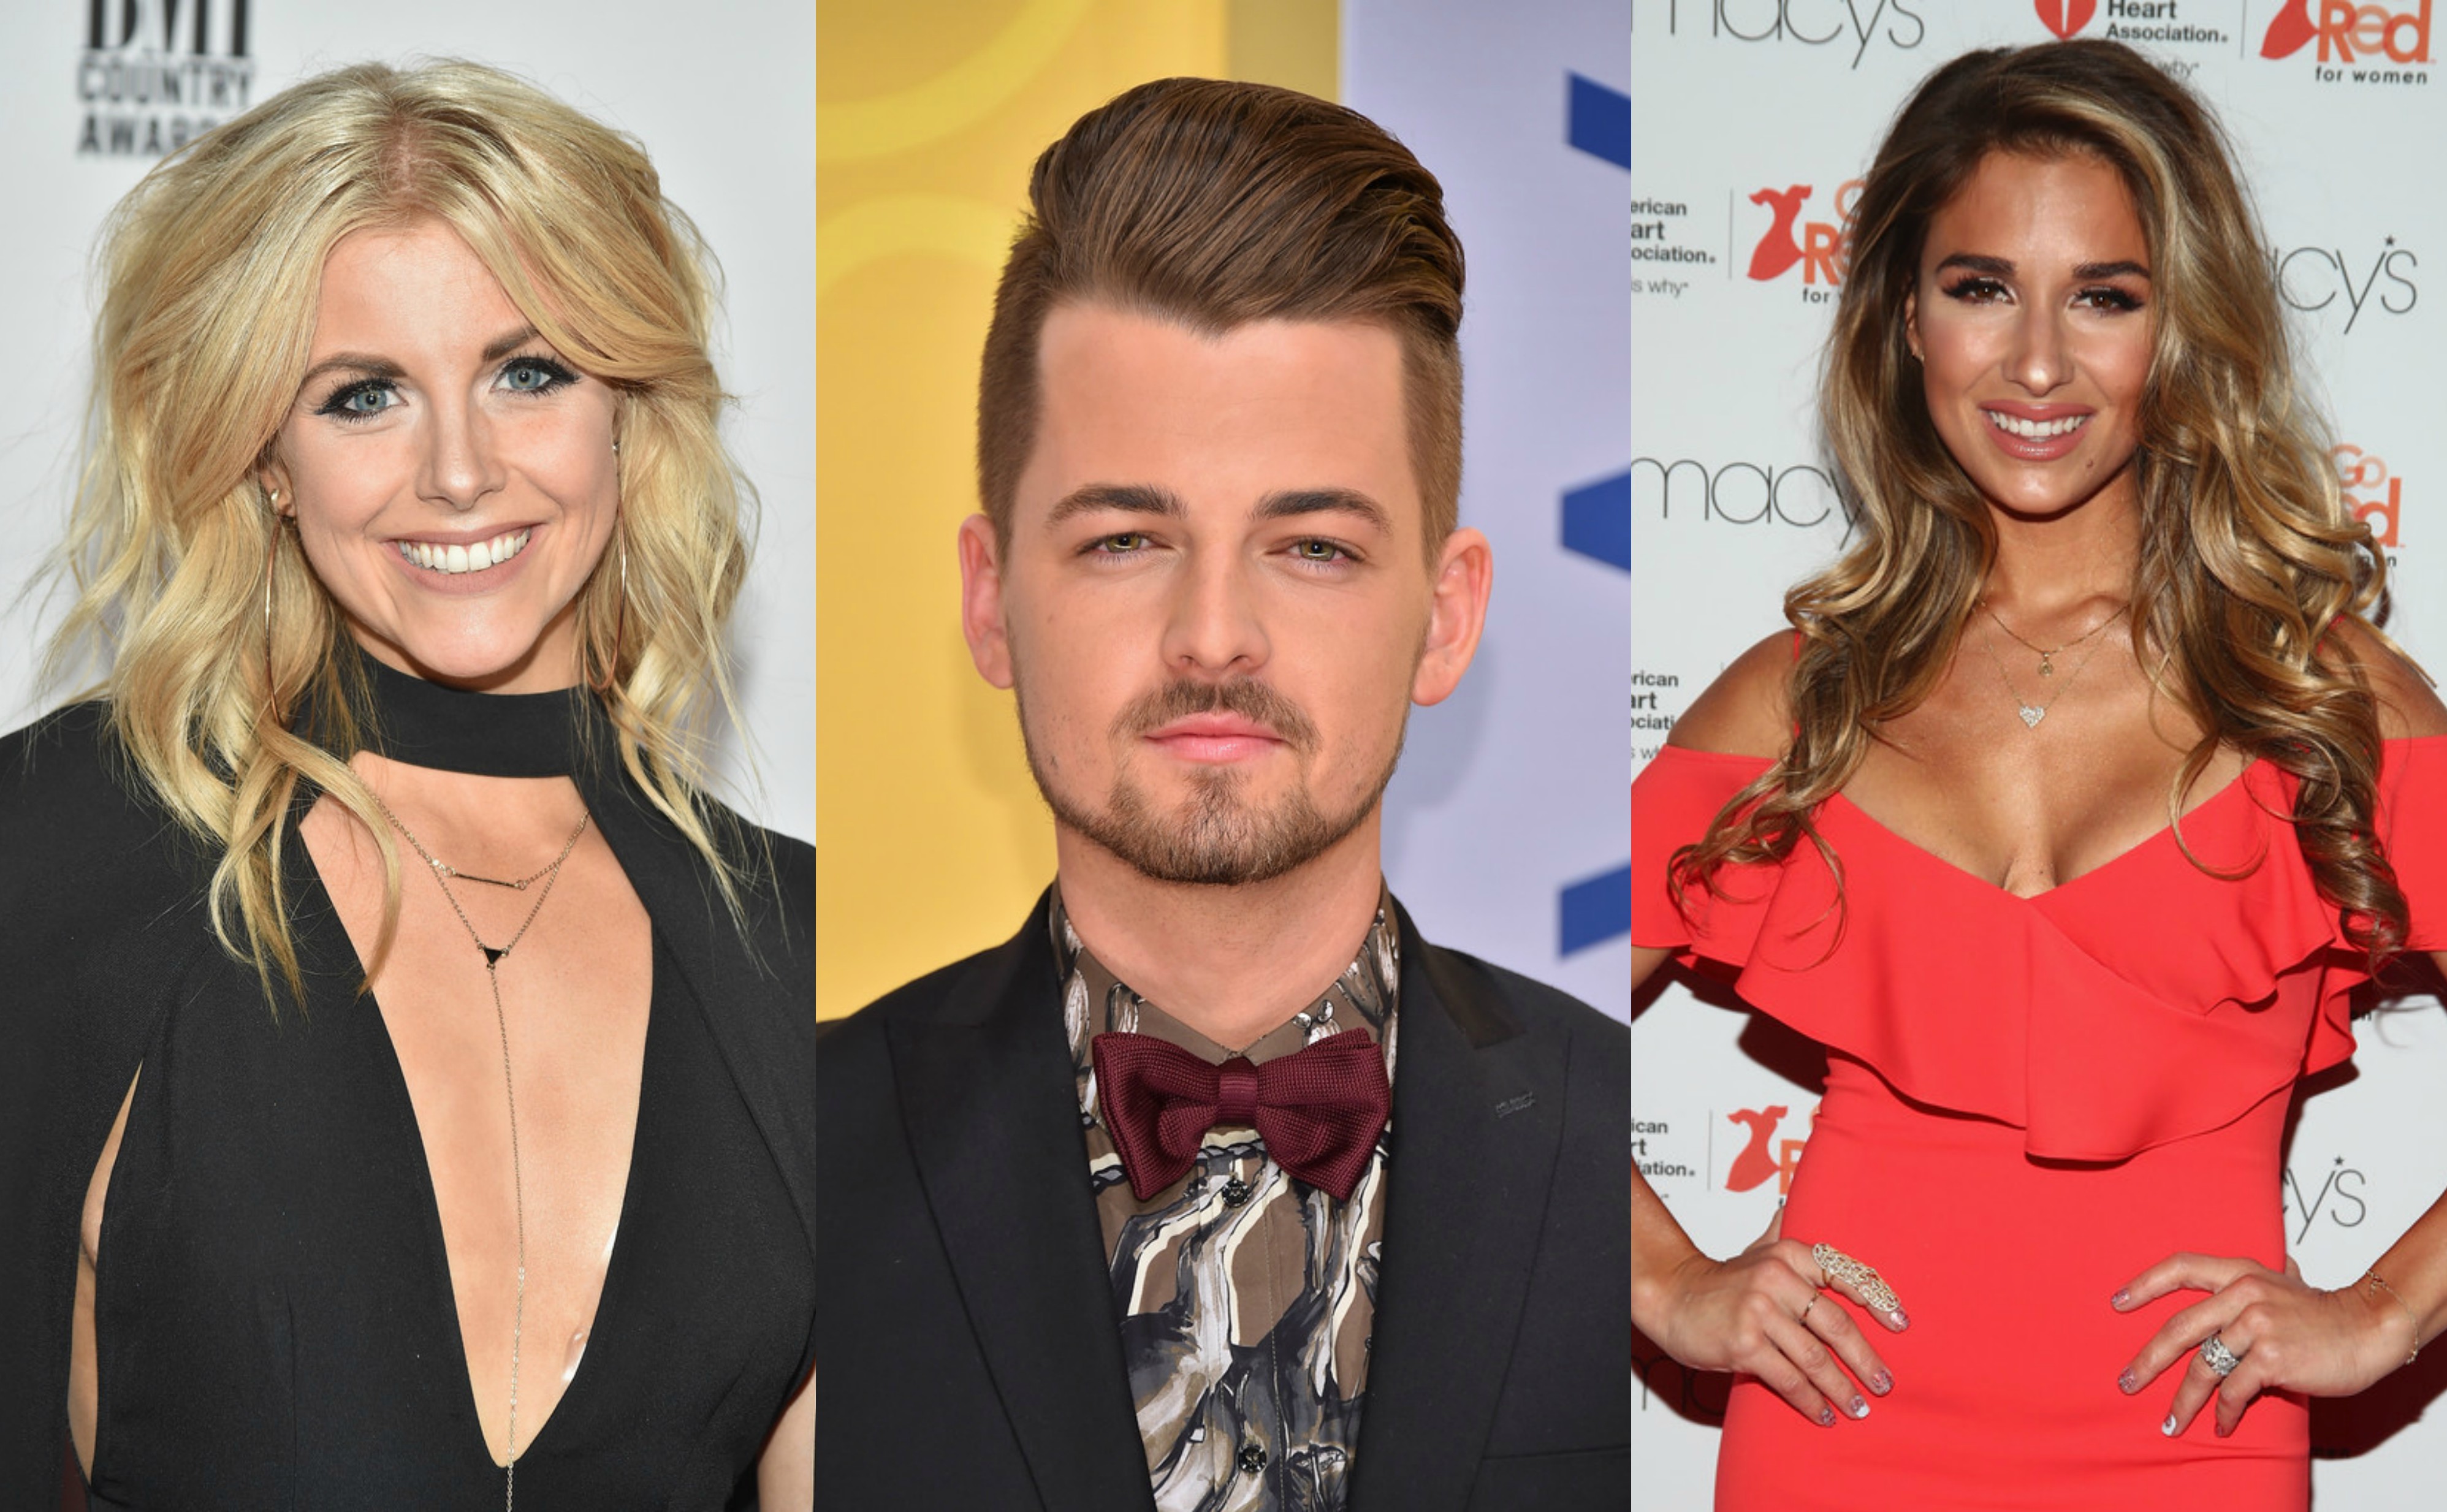 Jessie James Decker, Chase Bryant, Lindsay Ell to Host ‘ACM Red Carpet Live’ at the 52nd Academy of Country Music Awards